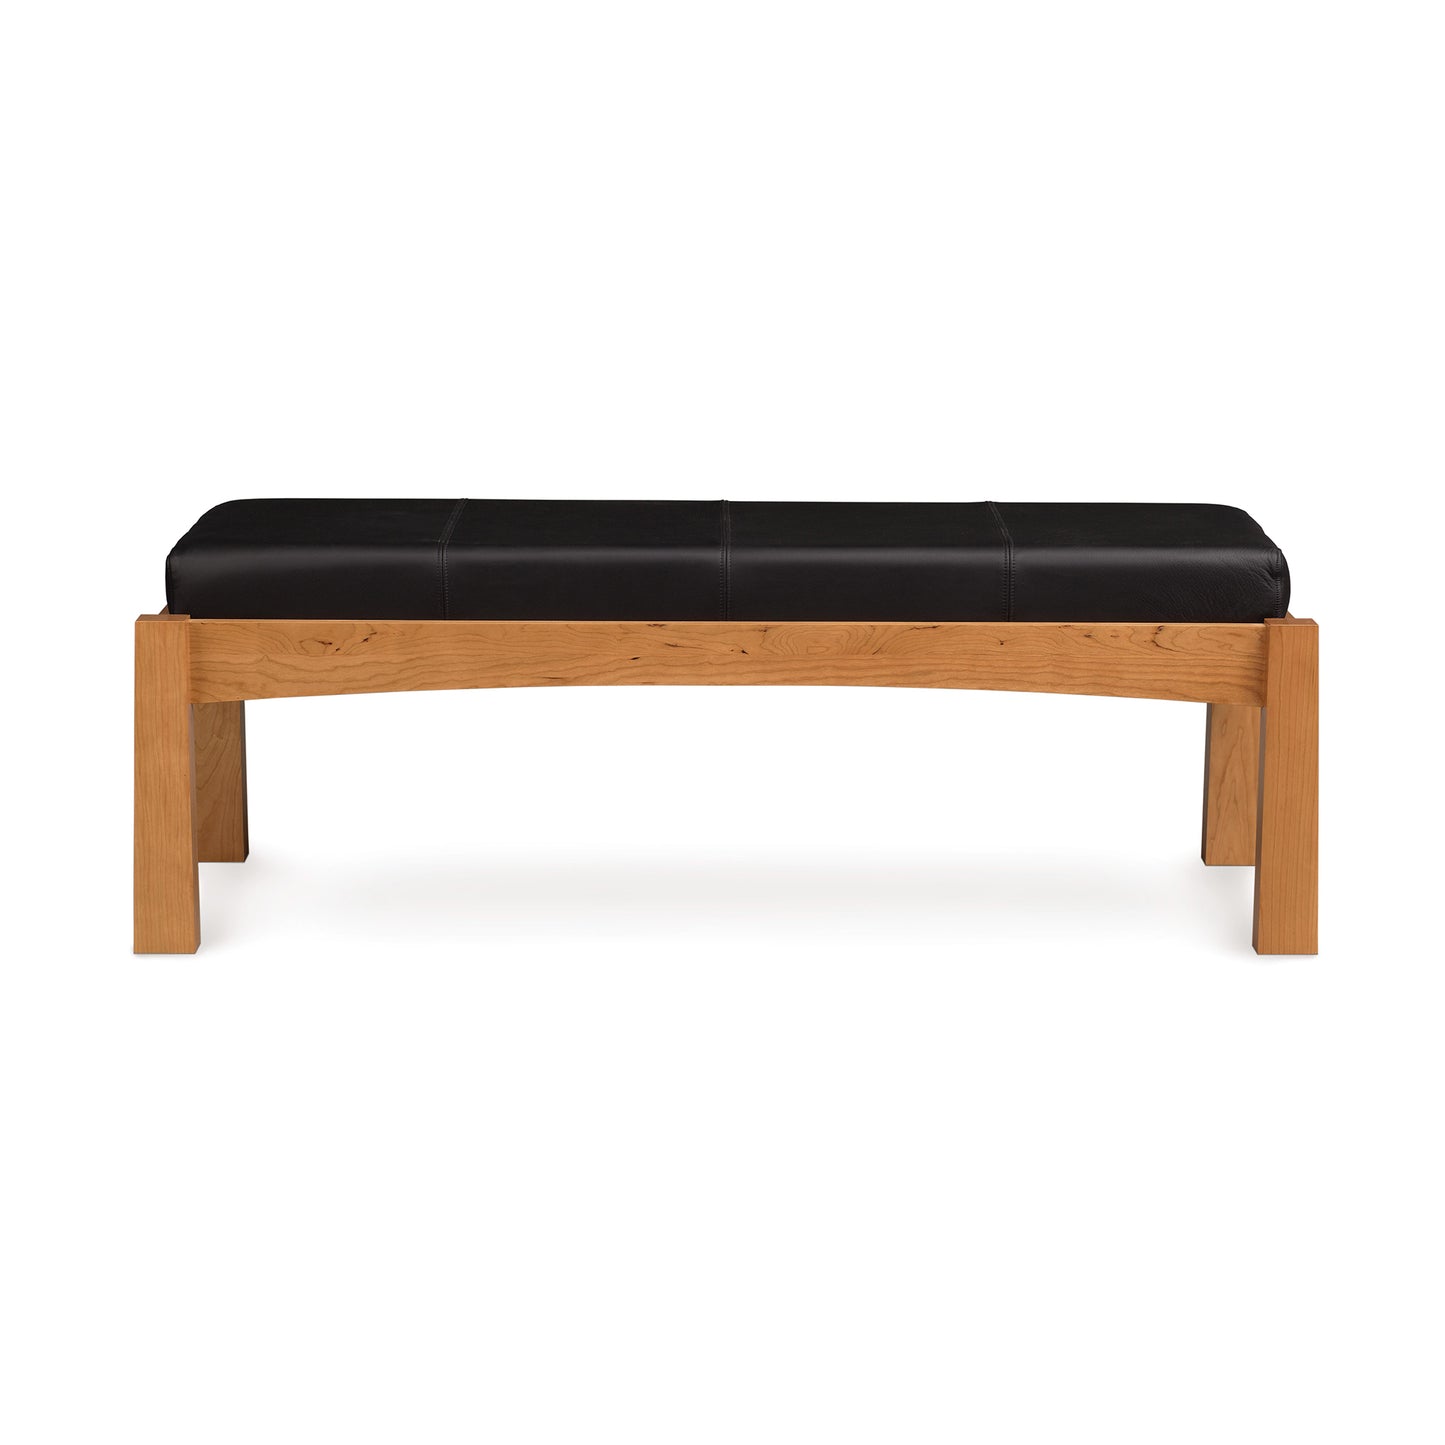 A modern Berkeley Upholstered Bench in cherry wood with a black leather seat, isolated on a white background by Copeland Furniture.